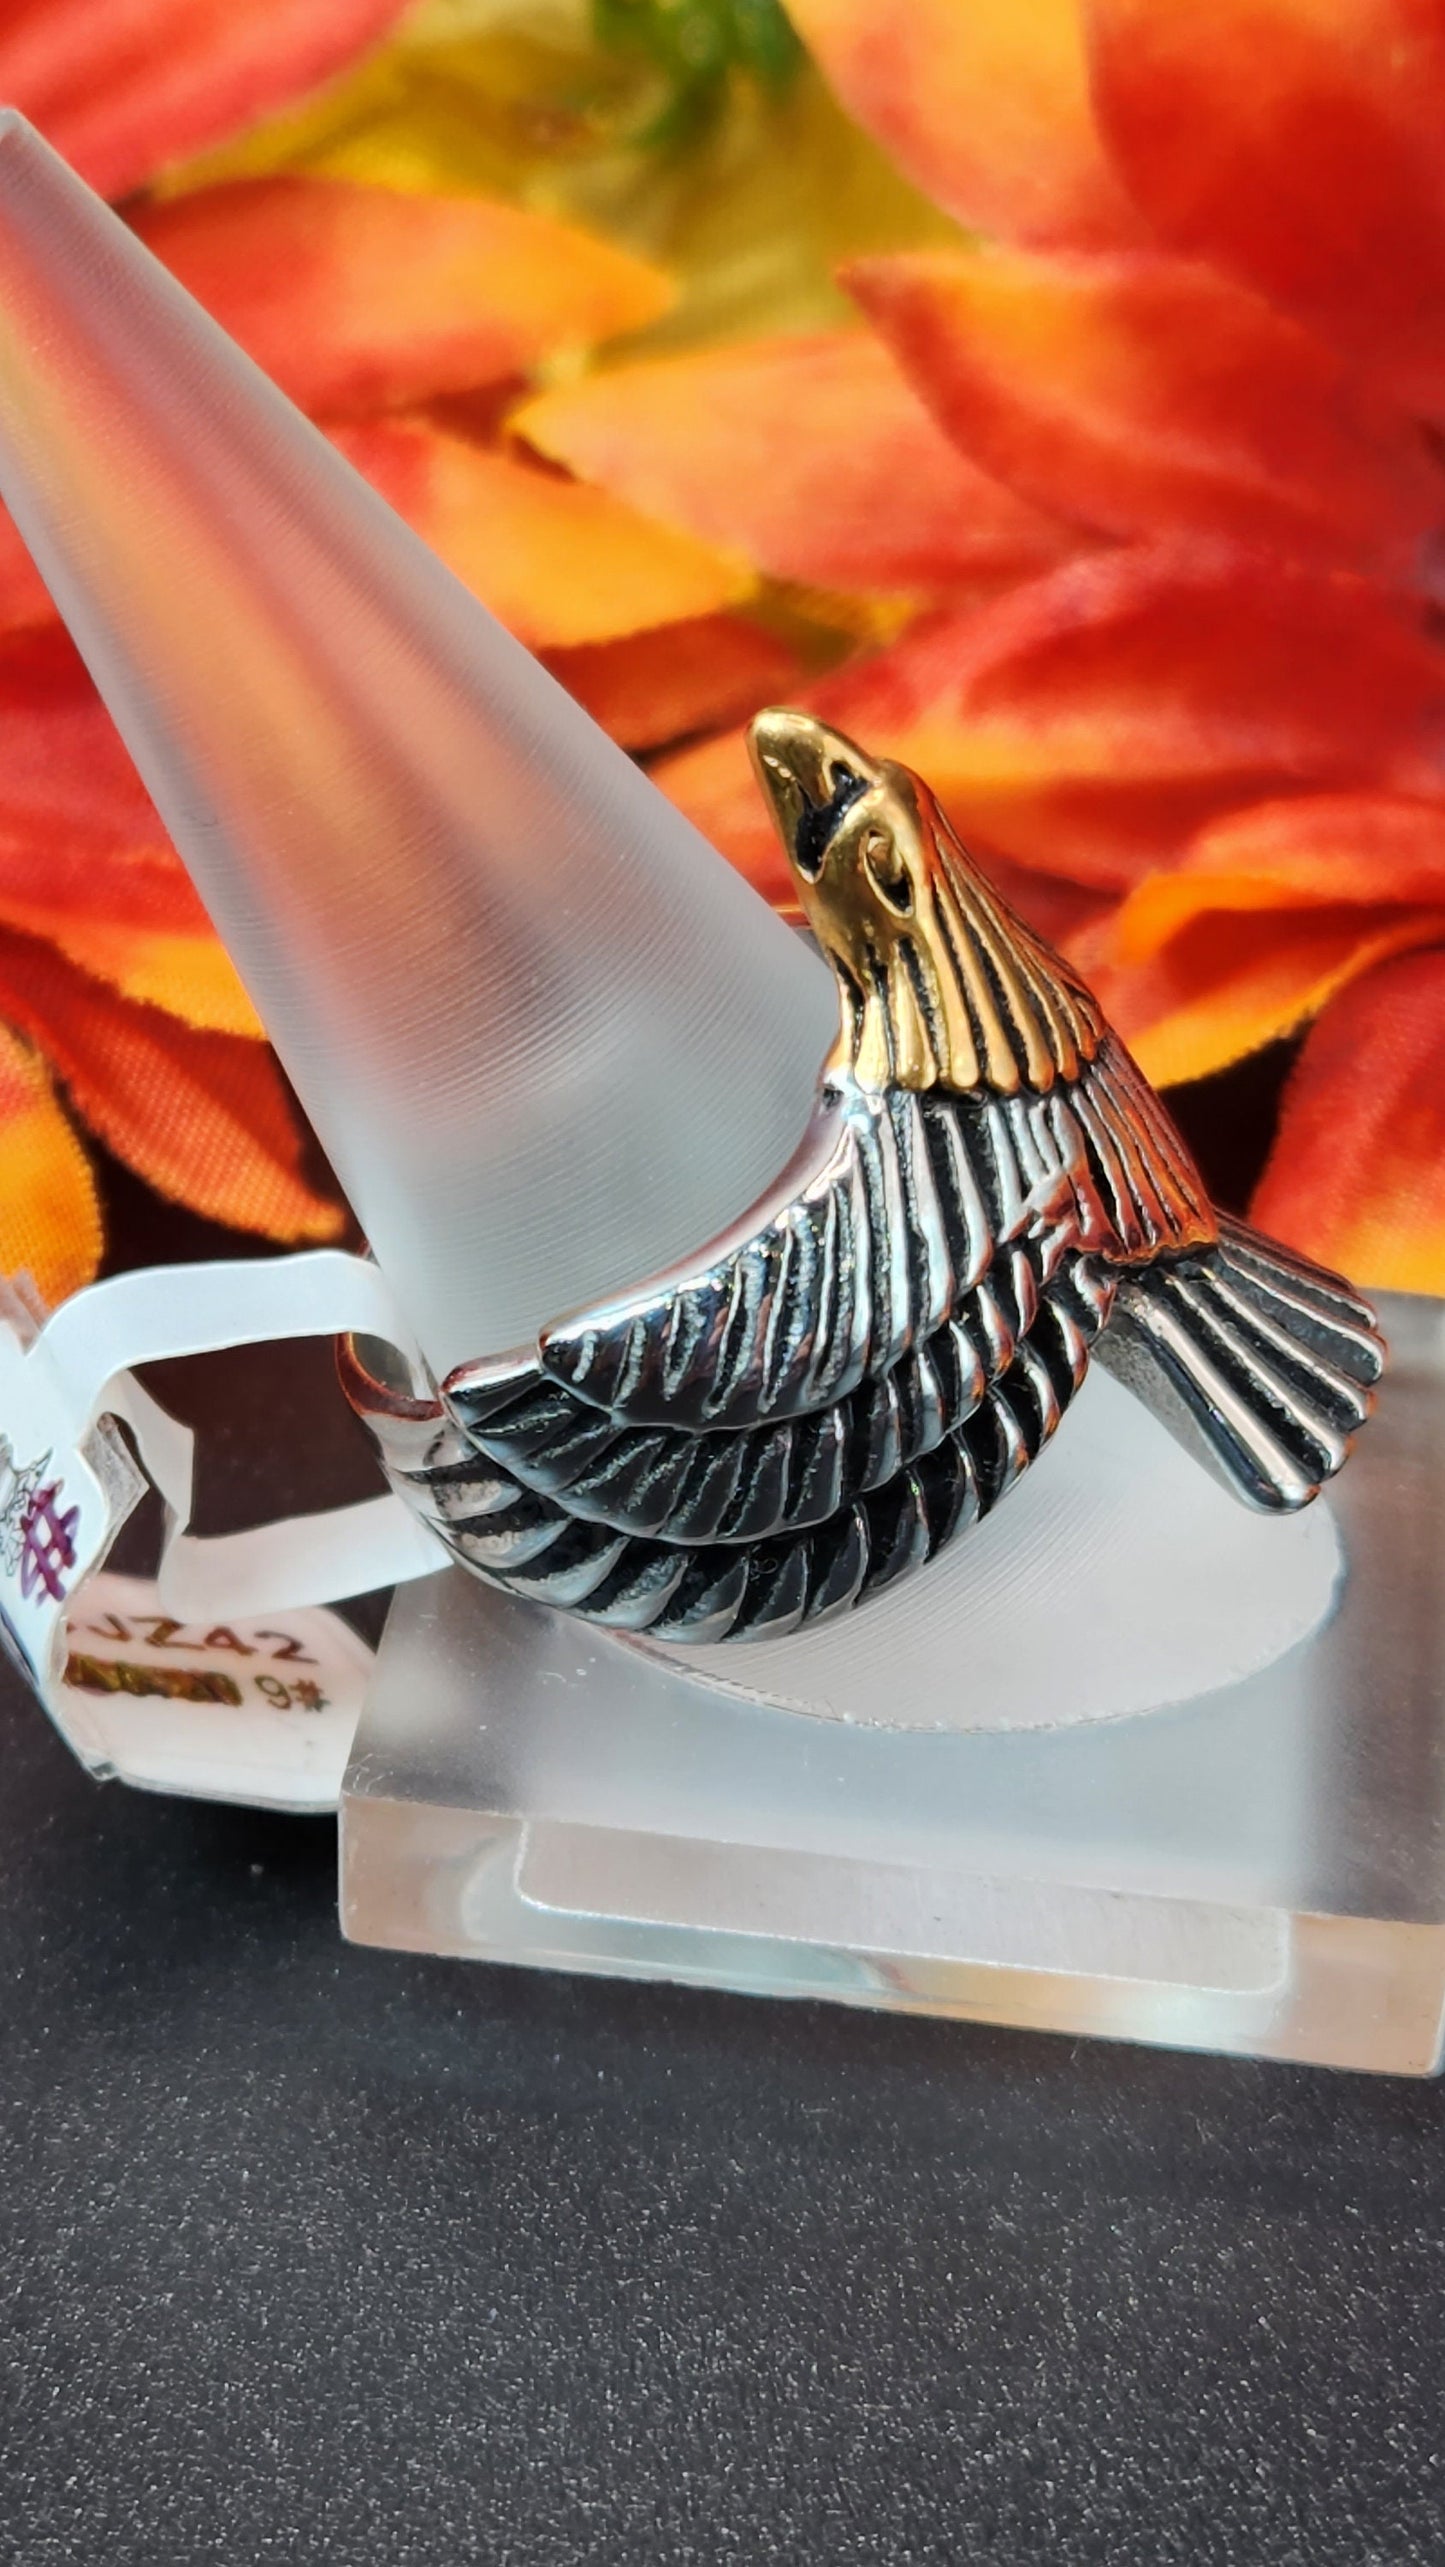 Stainless Steel Eagle Ring